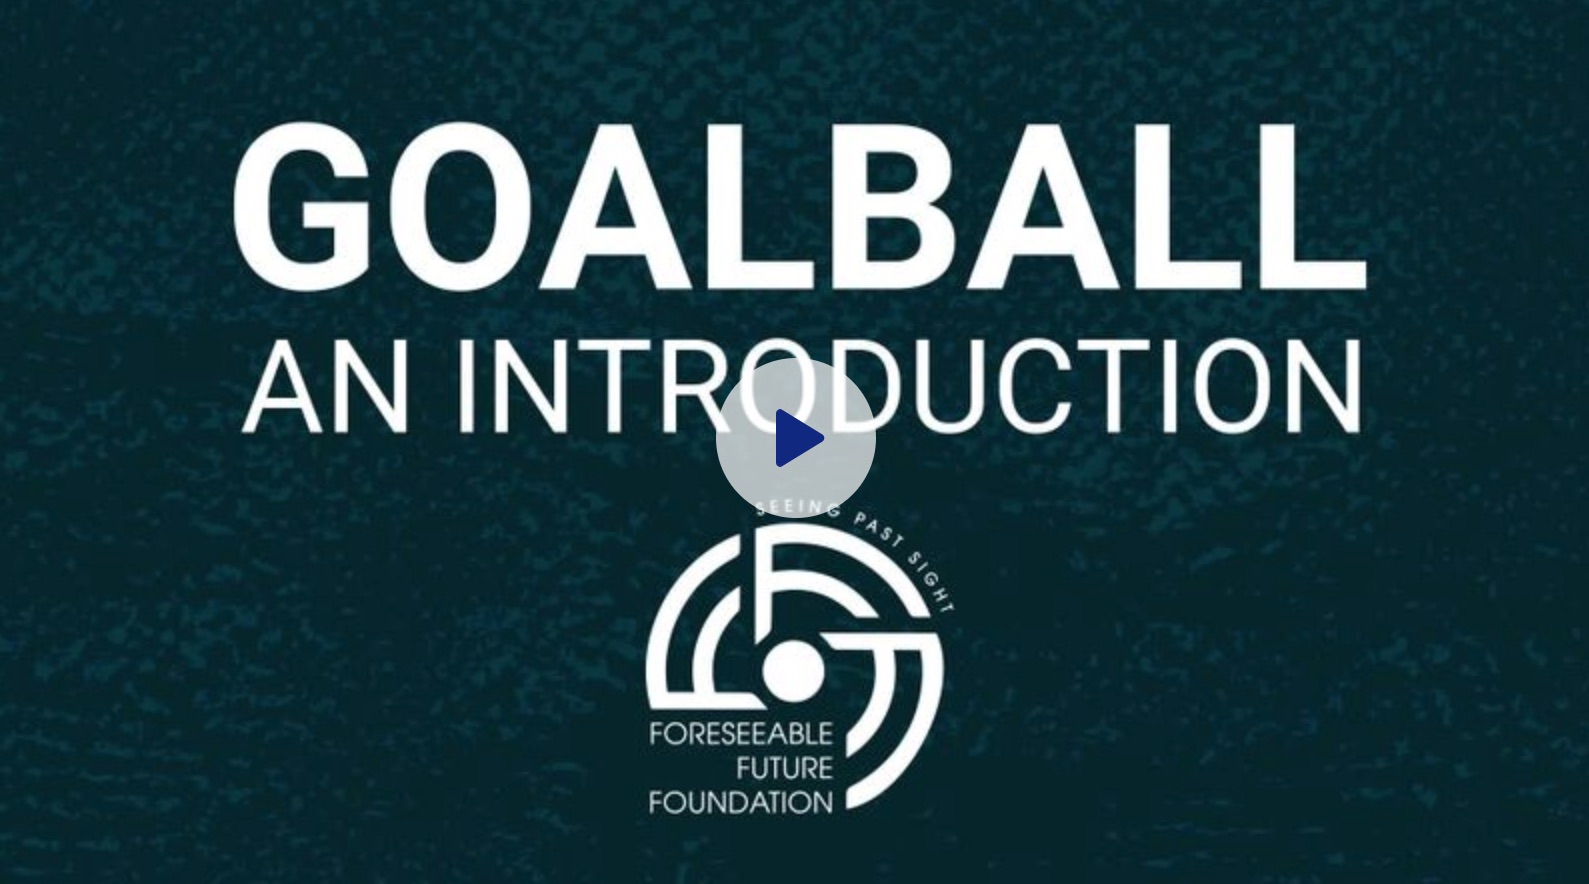 GoalBall for Foreseeable Future